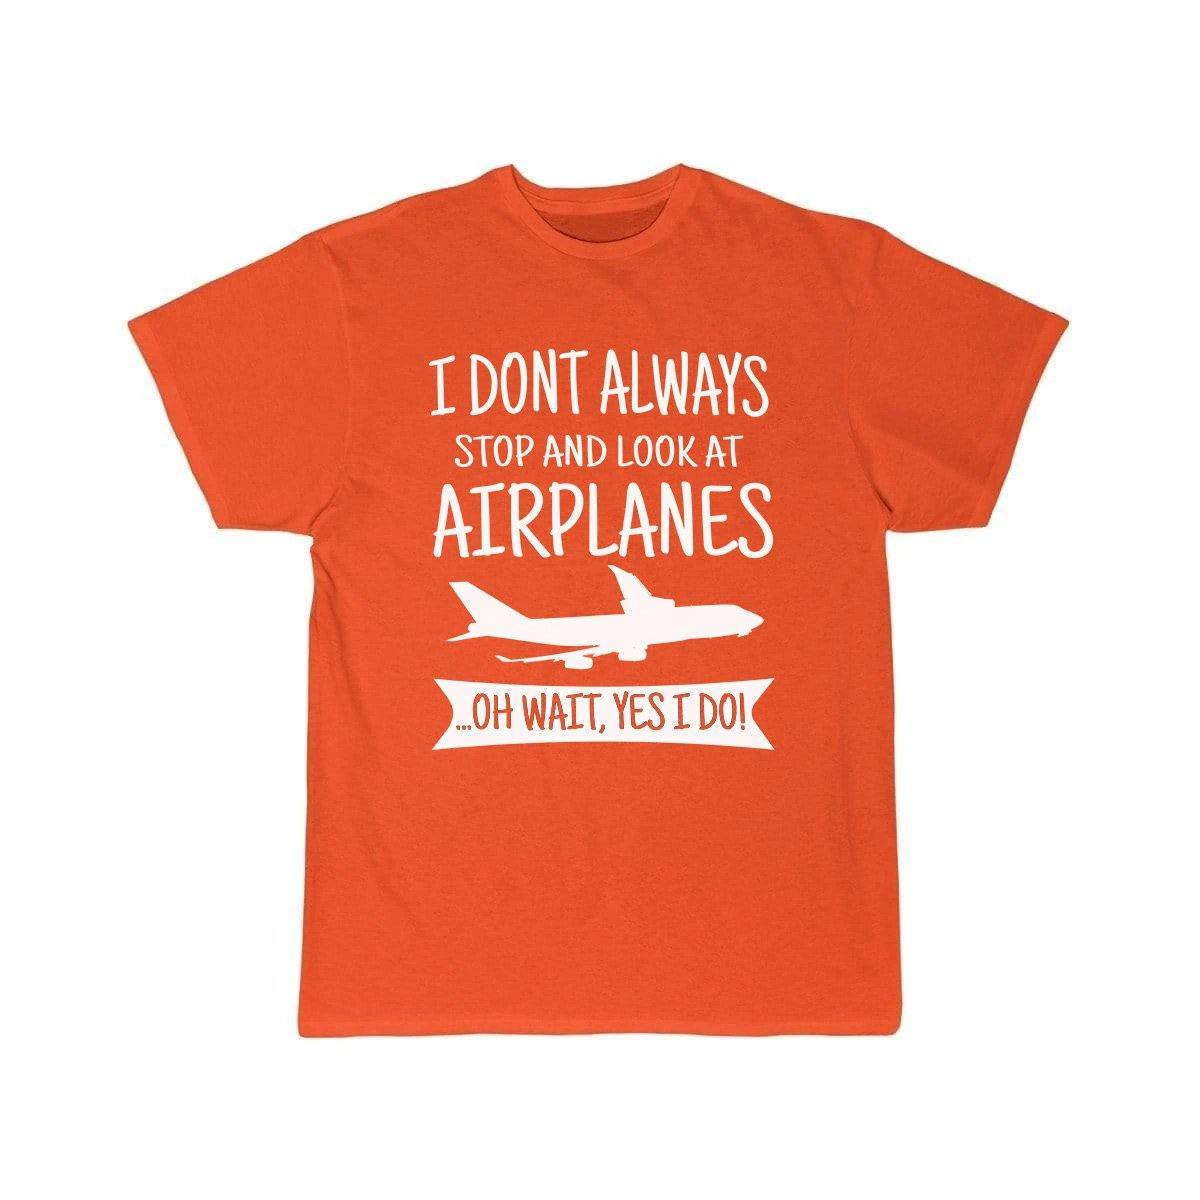 I DON'T ALWAYS STOP AND LOOK AT AIRPLANES,YES I DO T-SHIRT T SHIRT THE AV8R